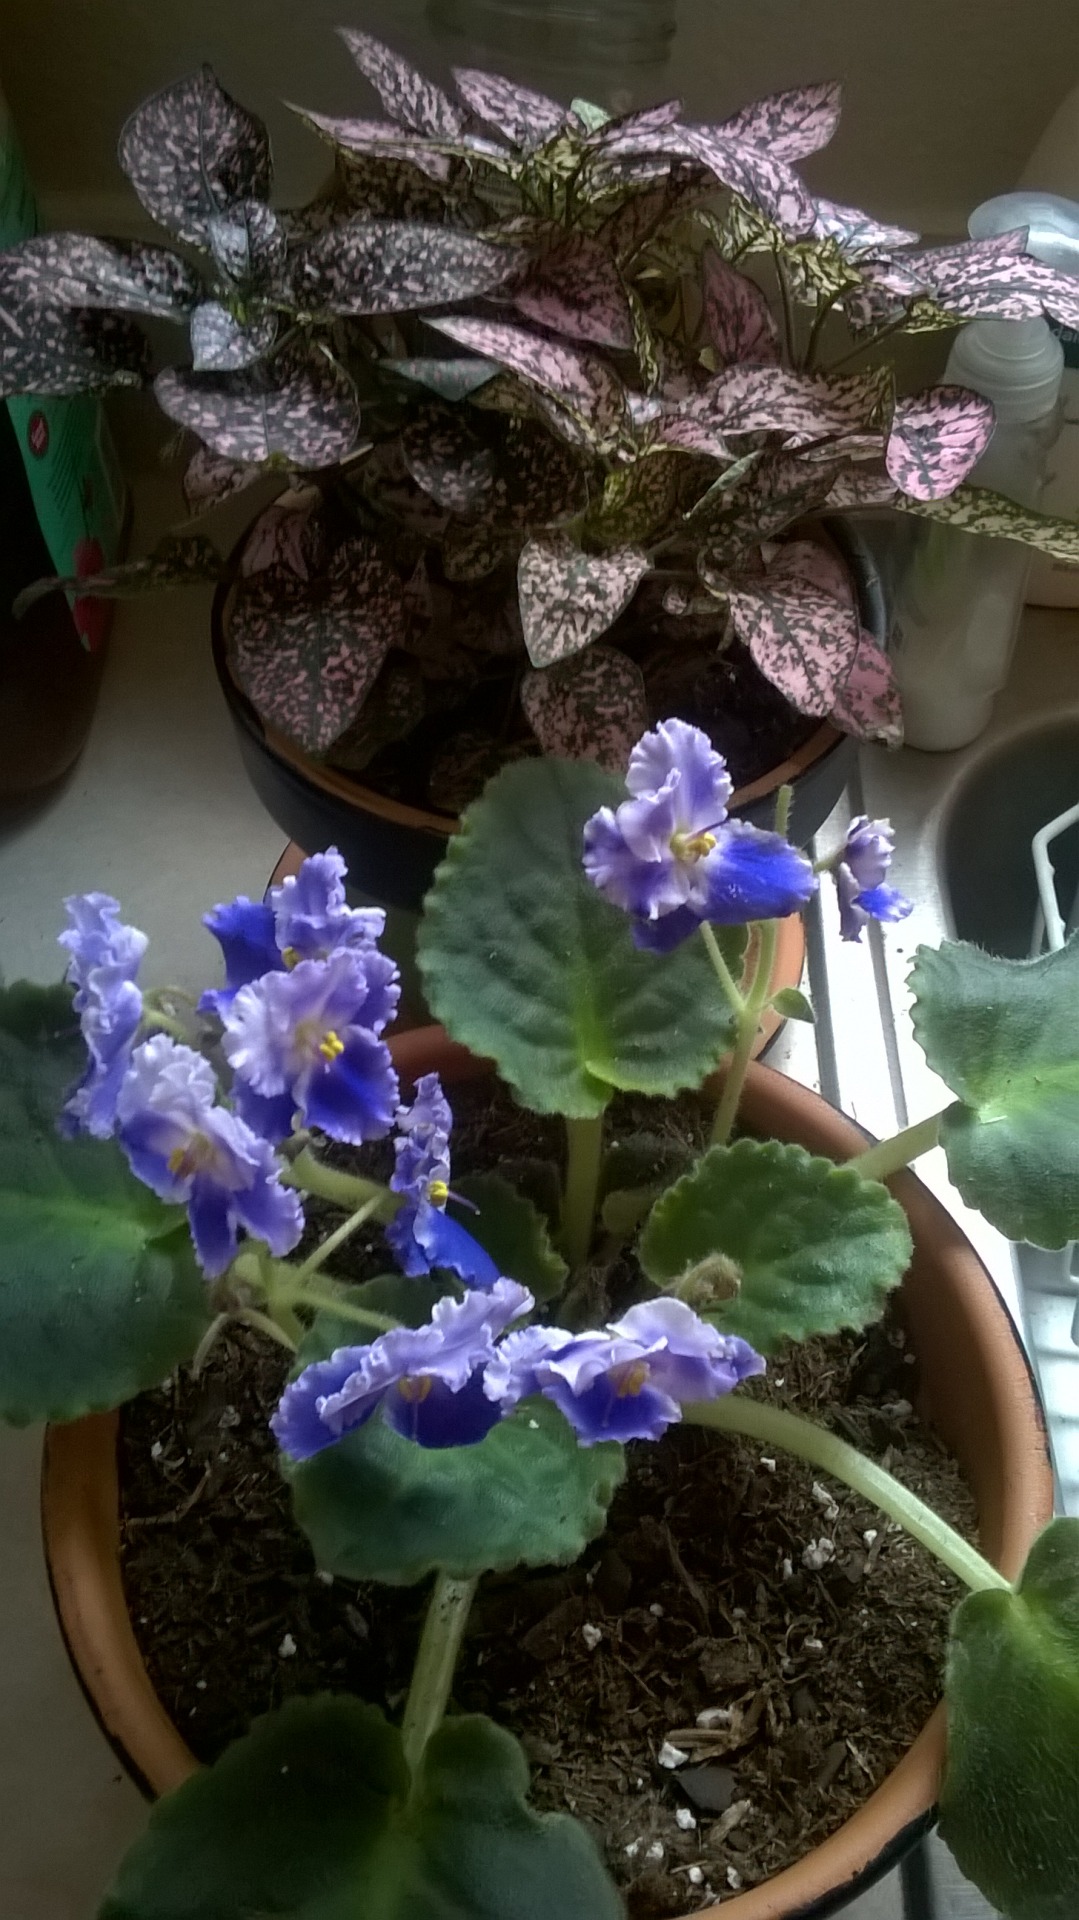 My African violets and my polka dot plant really seem to like the water I brought